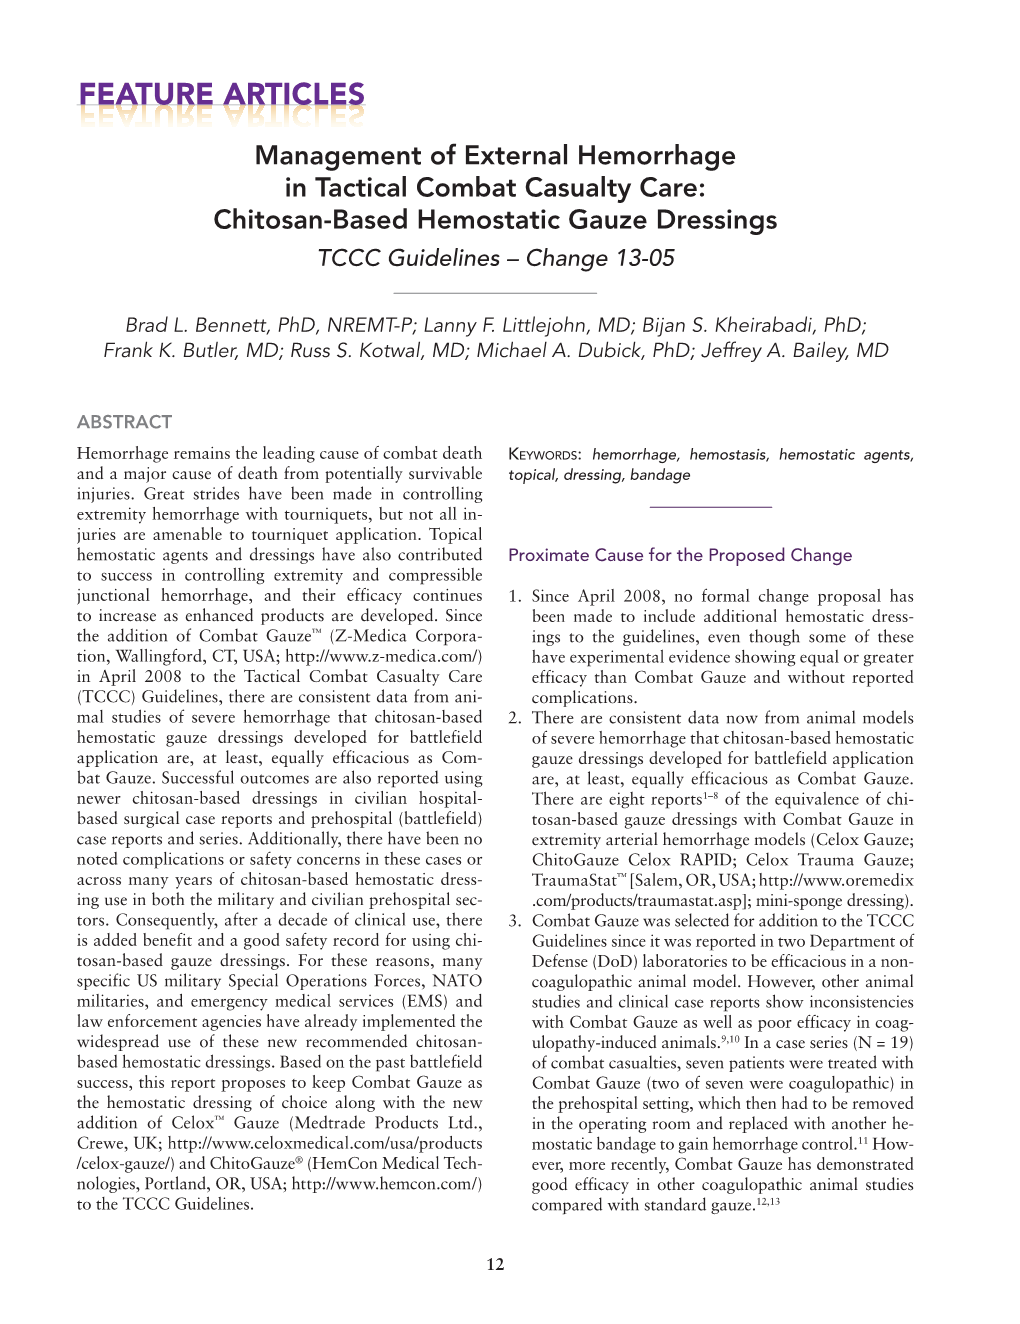 Management of External Hemorrhage in Tactical Combat Casualty Care: Chitosan-Based Hemostatic Gauze Dressings TCCC Guidelines – Change 13-05